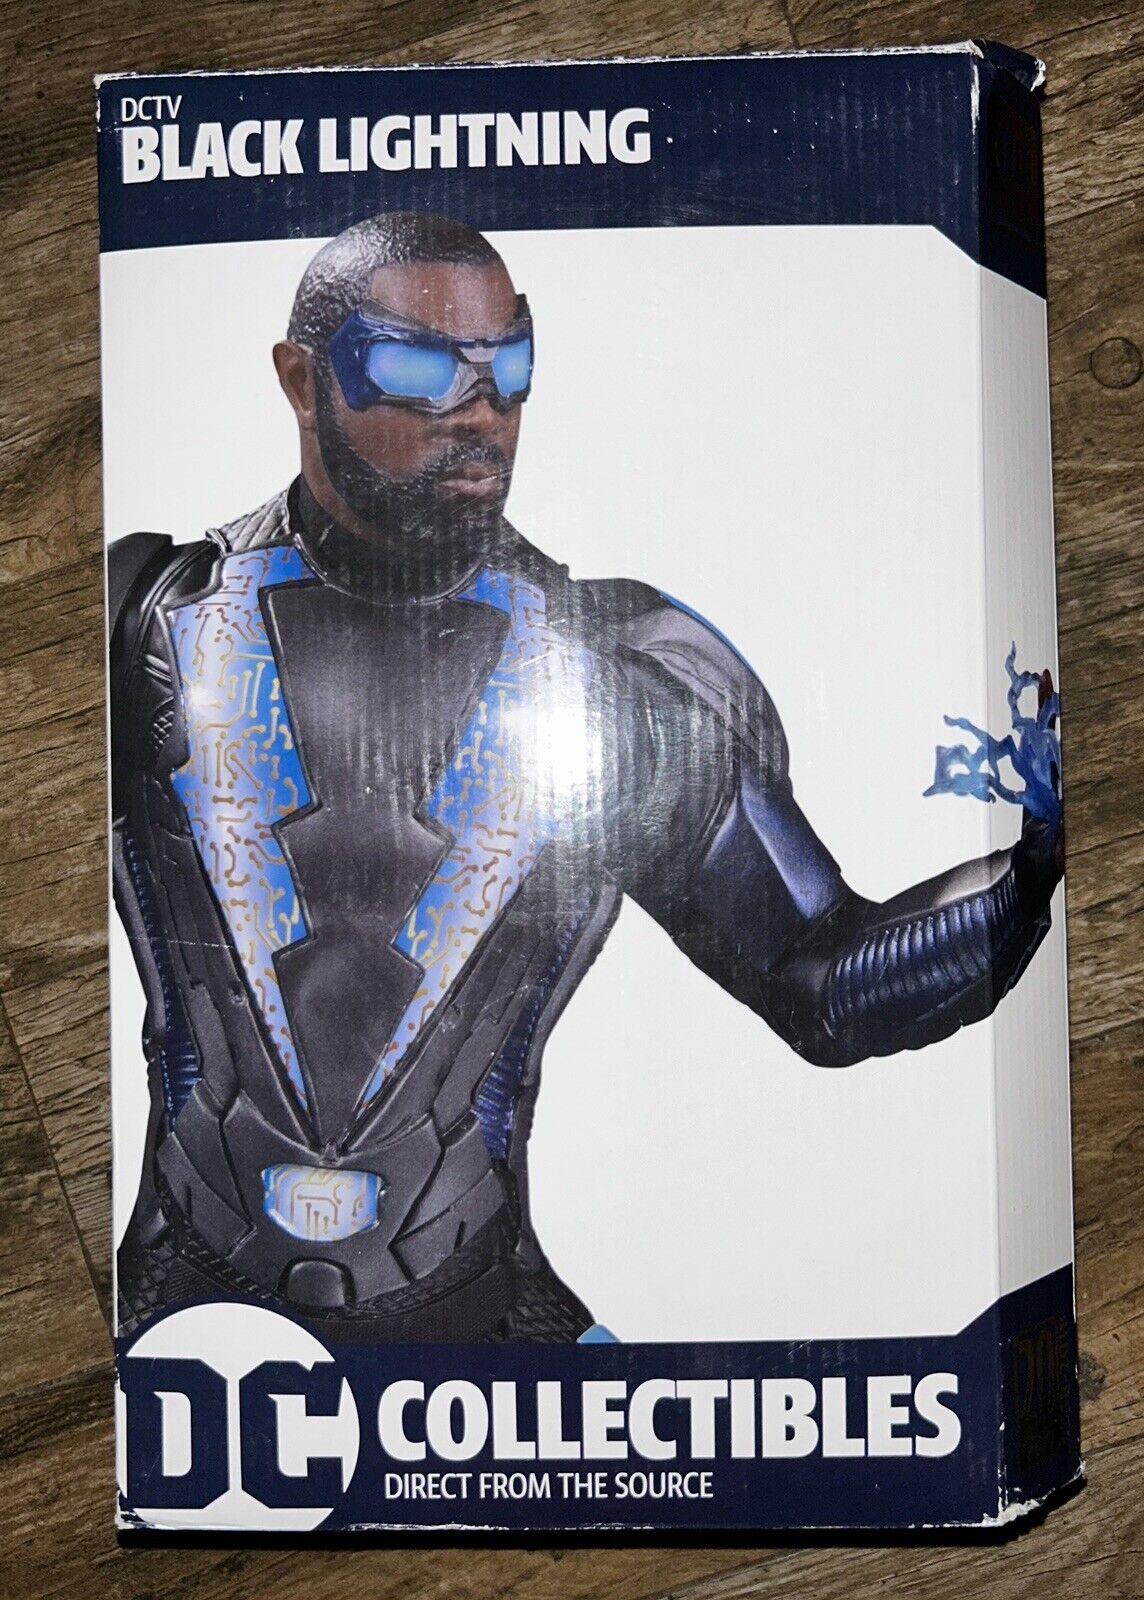 2018 DC Collectibles Black Lightning Statue New In Package